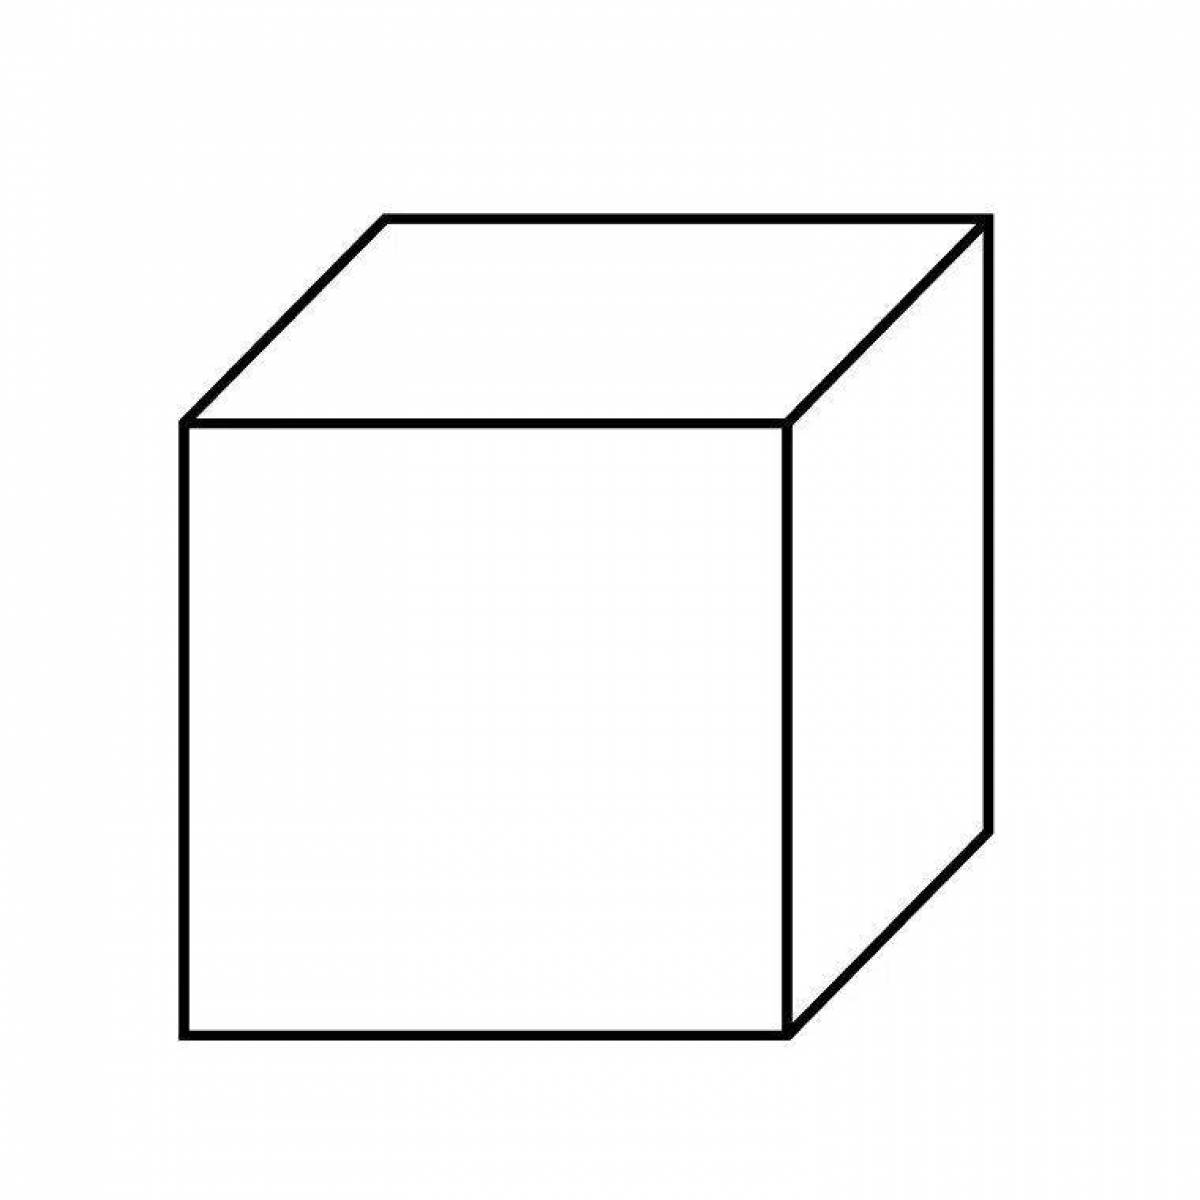 Exciting cube coloring page